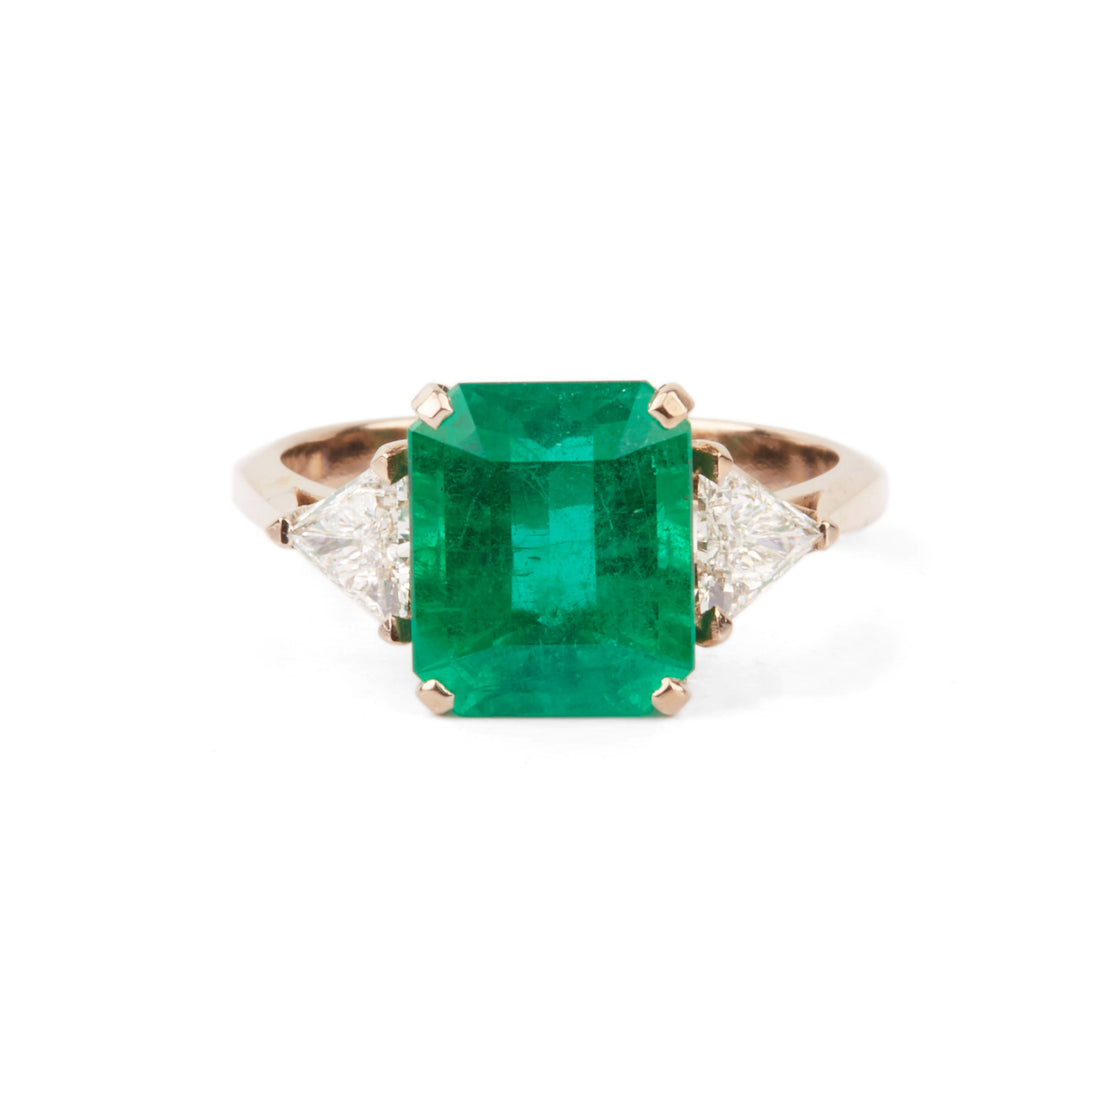  Large Emerald and Diamond Deco Ring by Guy & Max | The Cut London